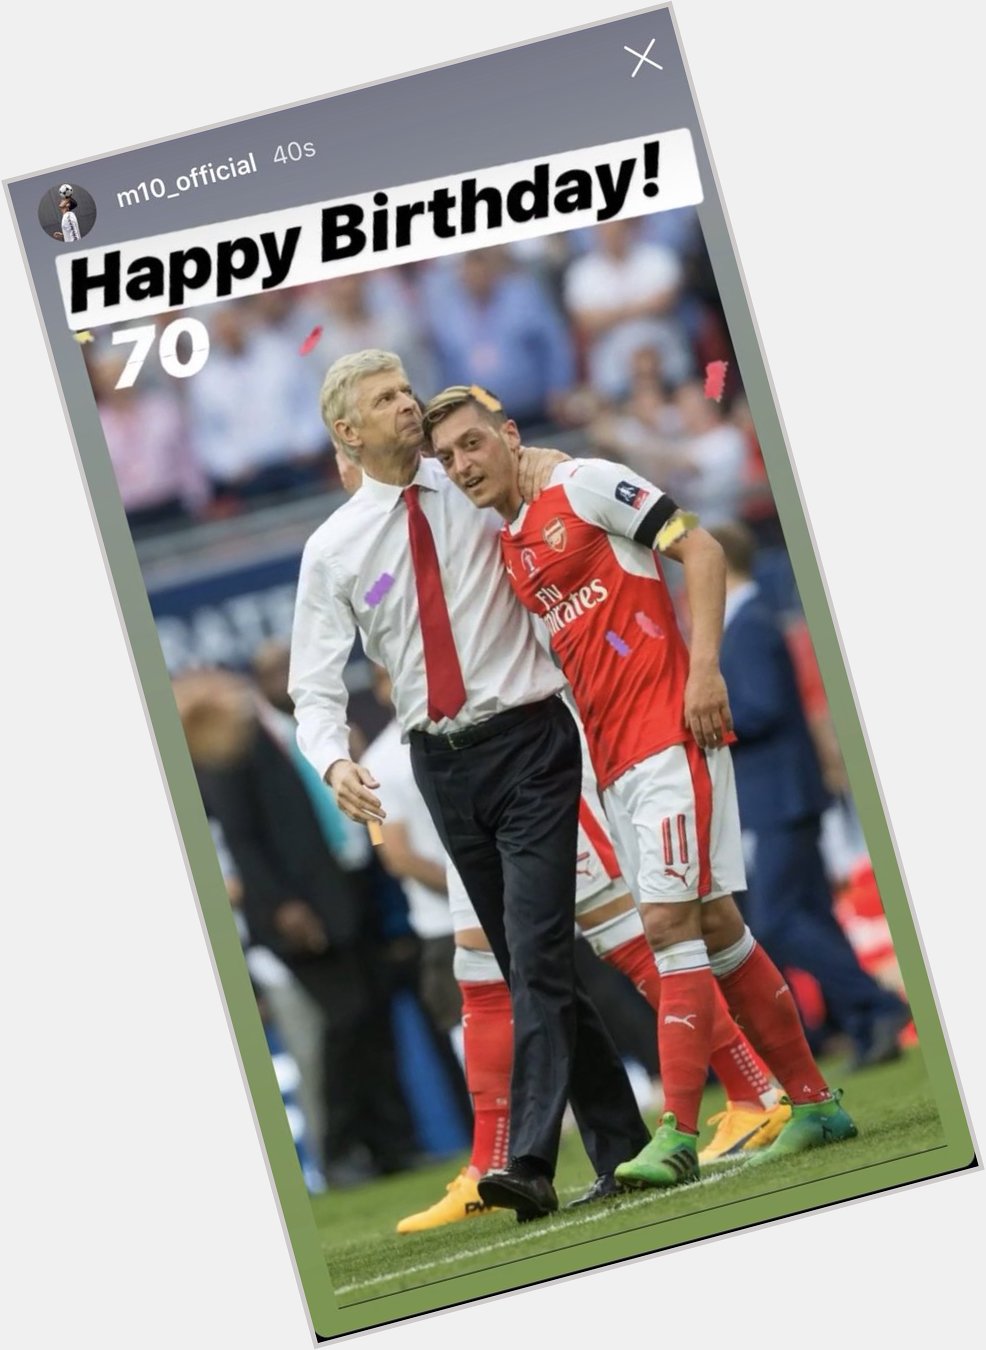 Mesut Ozil wishing his former Arsenal boss Arsene Wenger happy birthday on his personal insta account this afternoon 